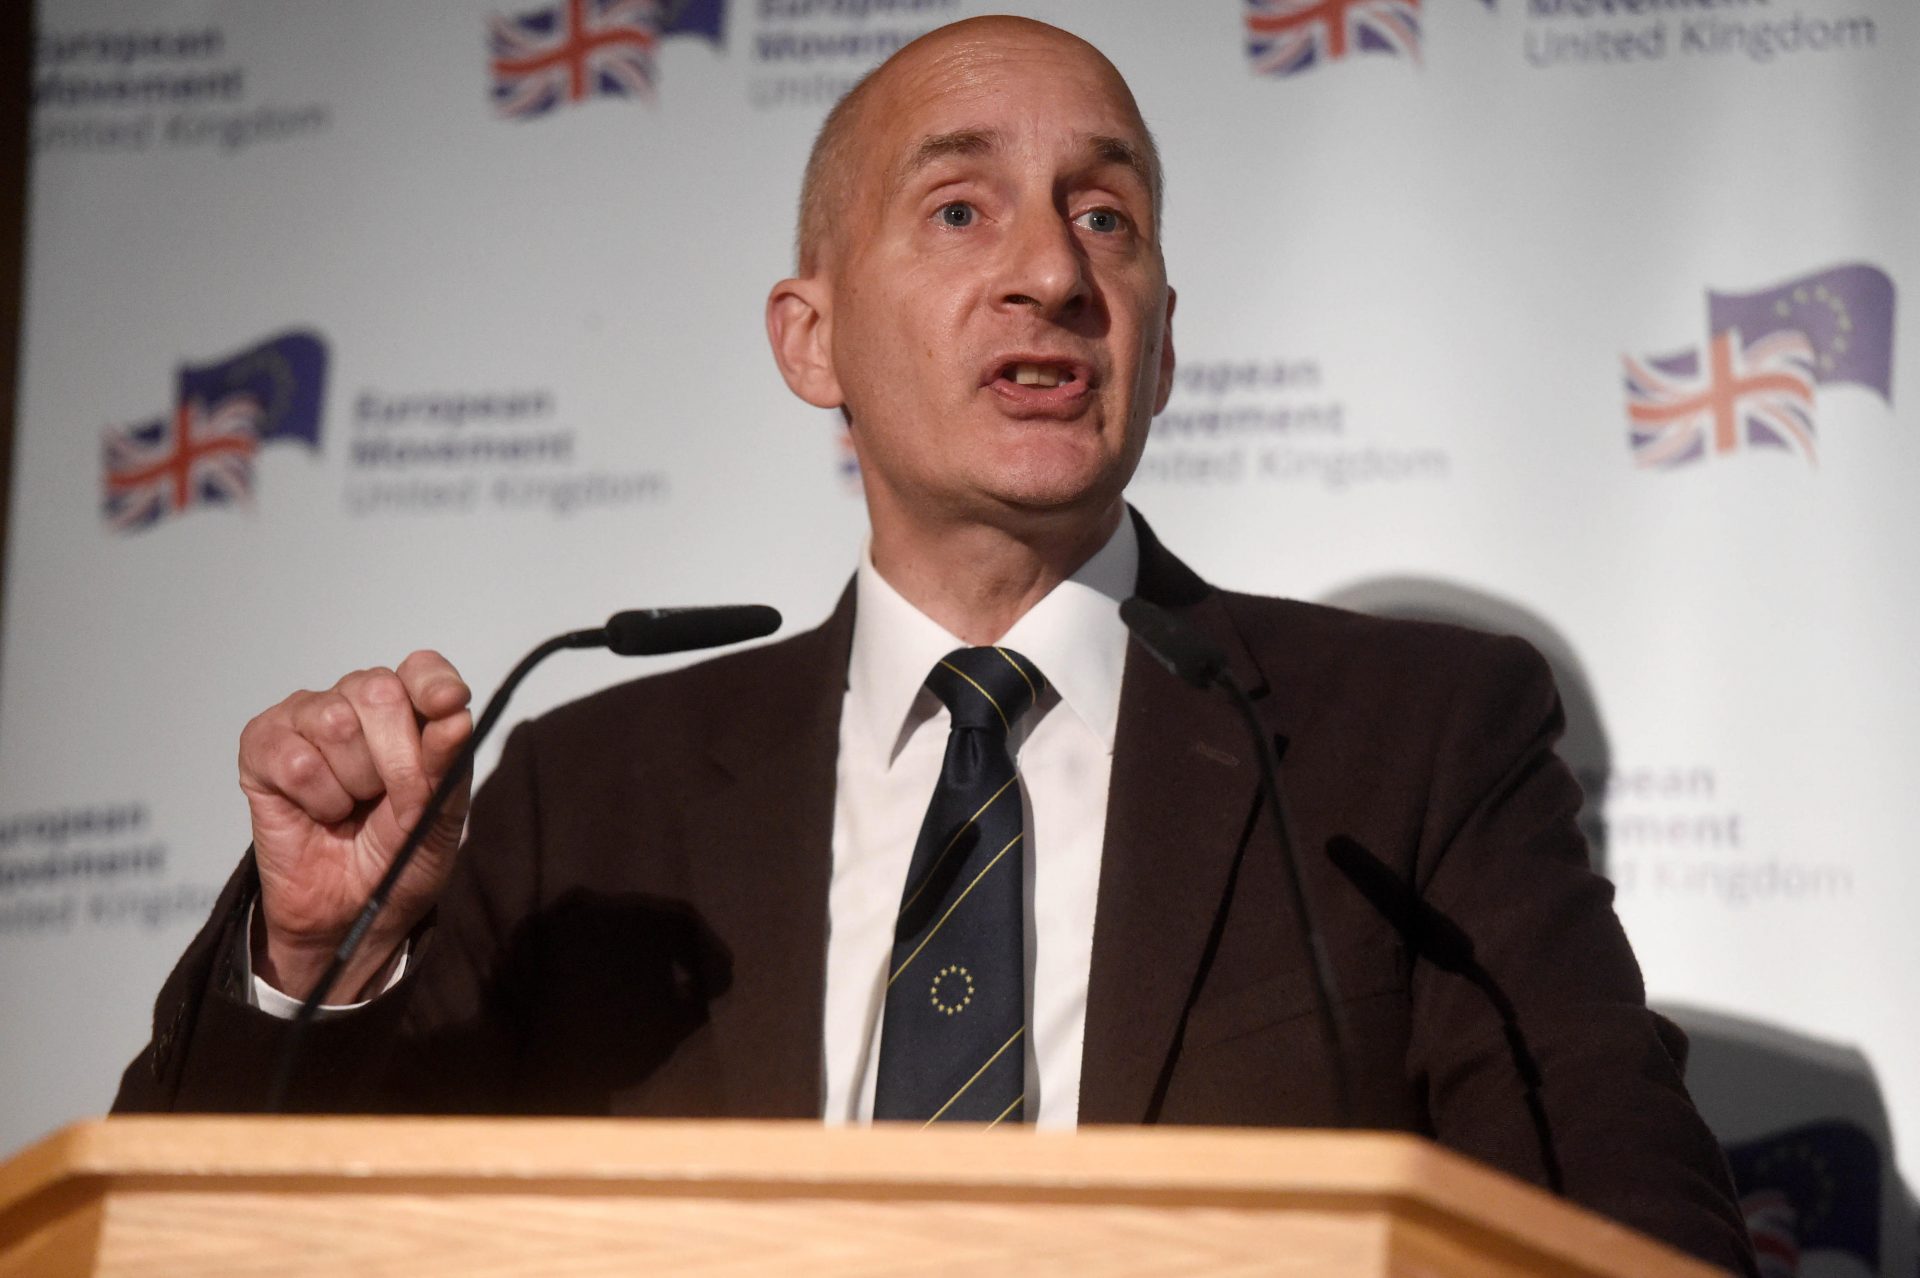 Lord Adonis' new book looks at political leaders. Photo: PeterSummers/Getty.